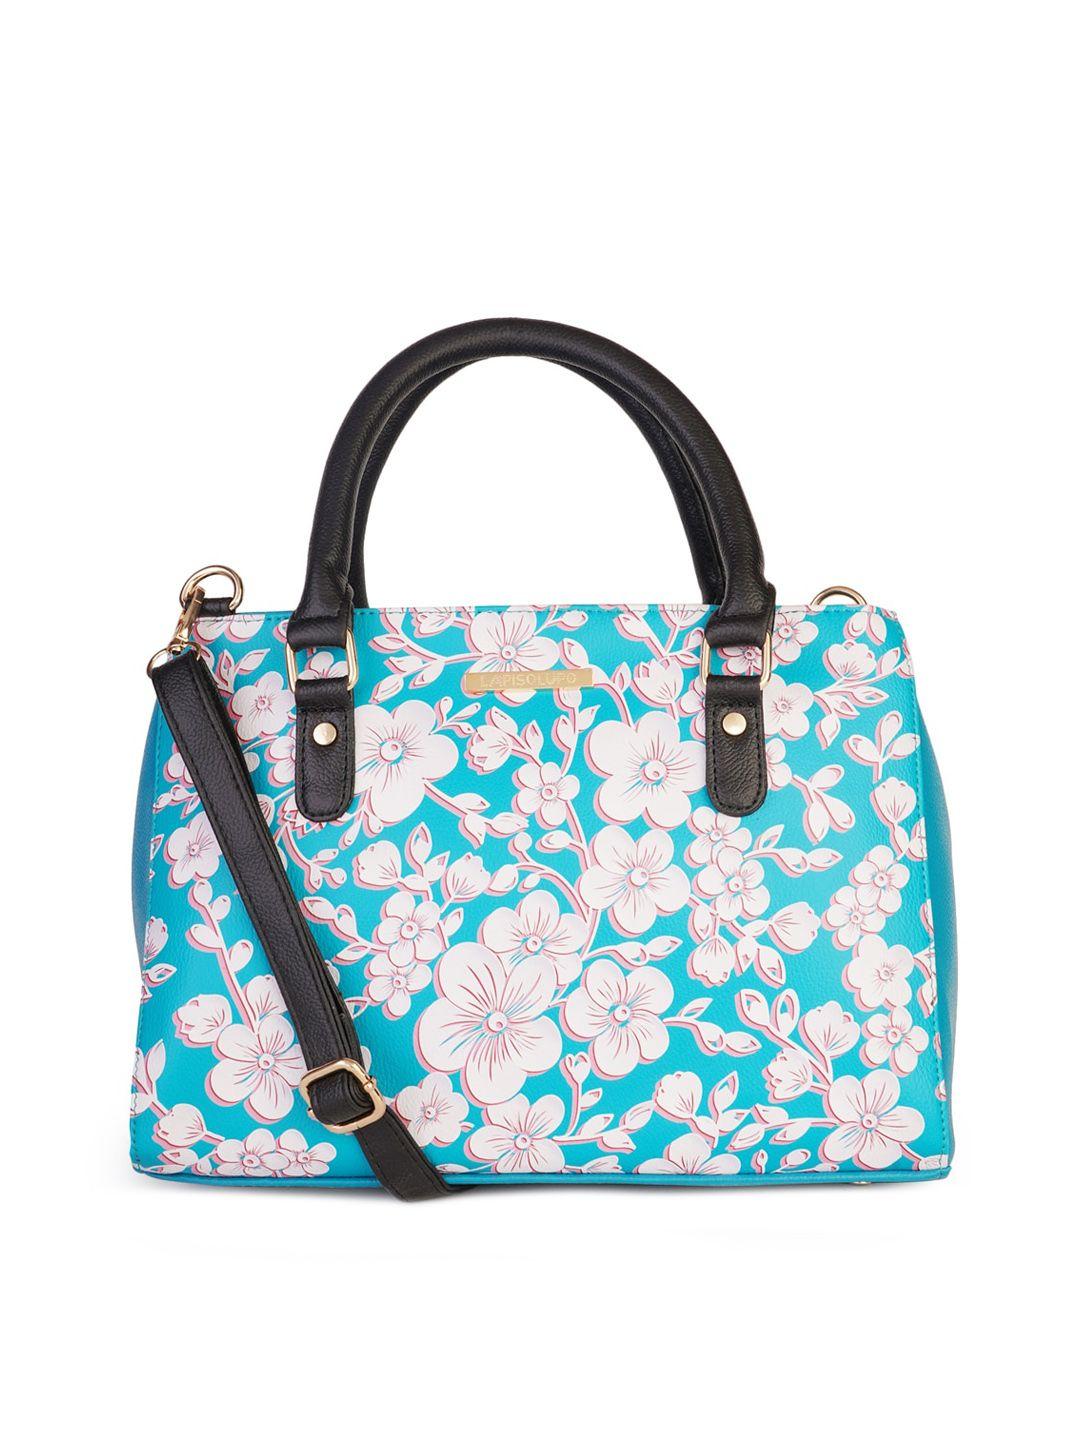 lapis o lupo women turquoise blue floral printed structured handheld bag